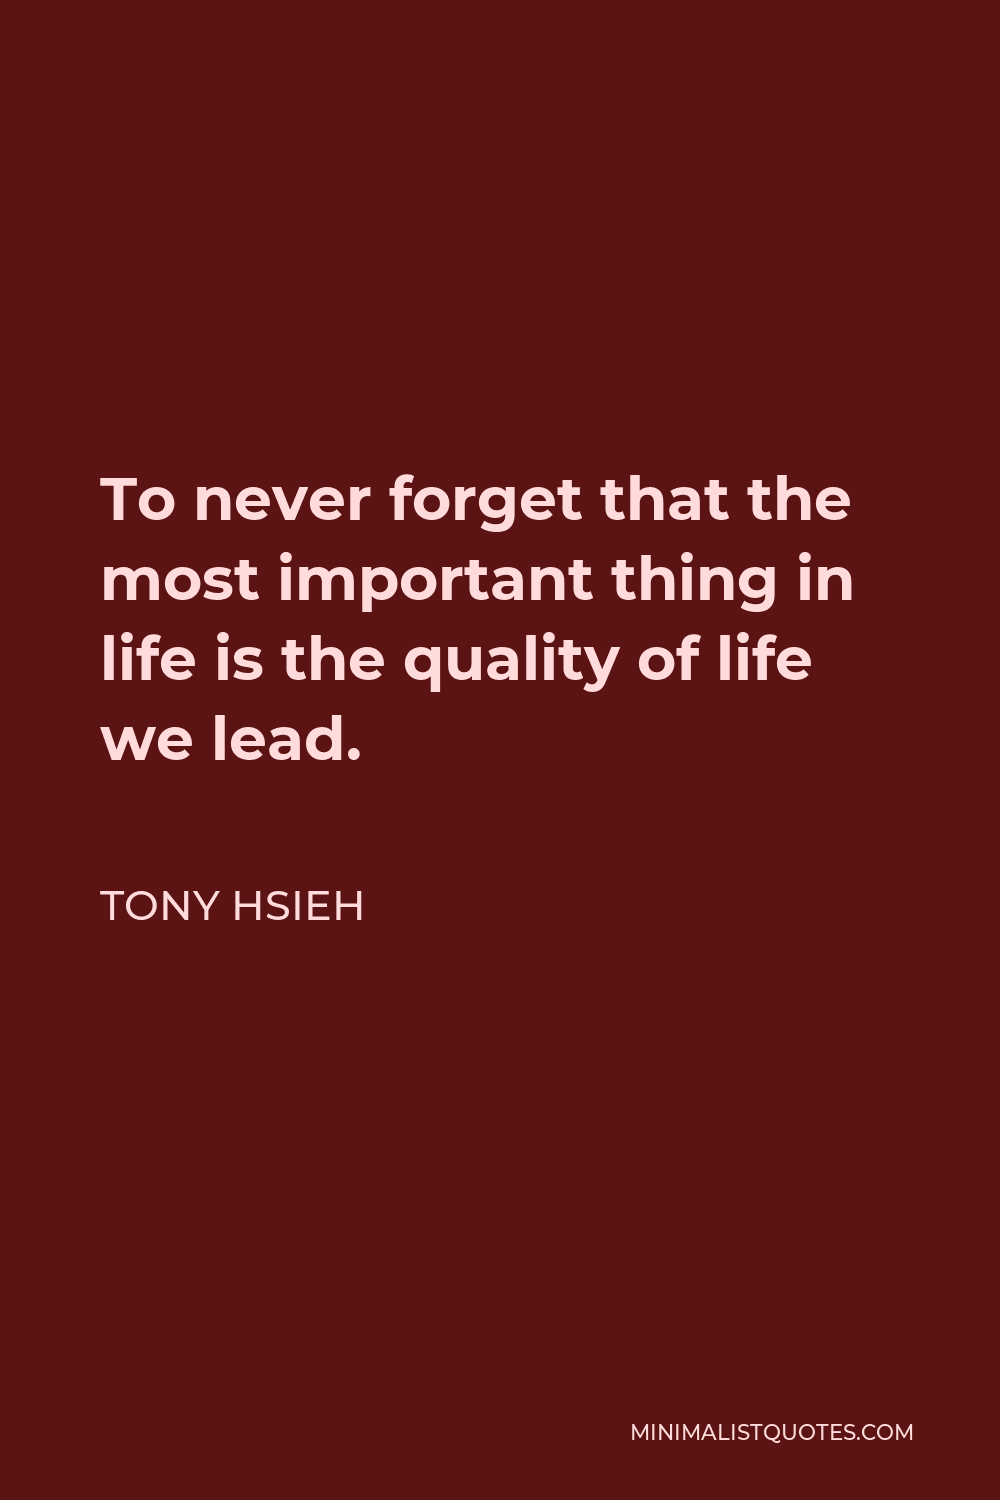 Tony Hsieh Quote - To never forget that the most important thing in life is the quality of life we lead.